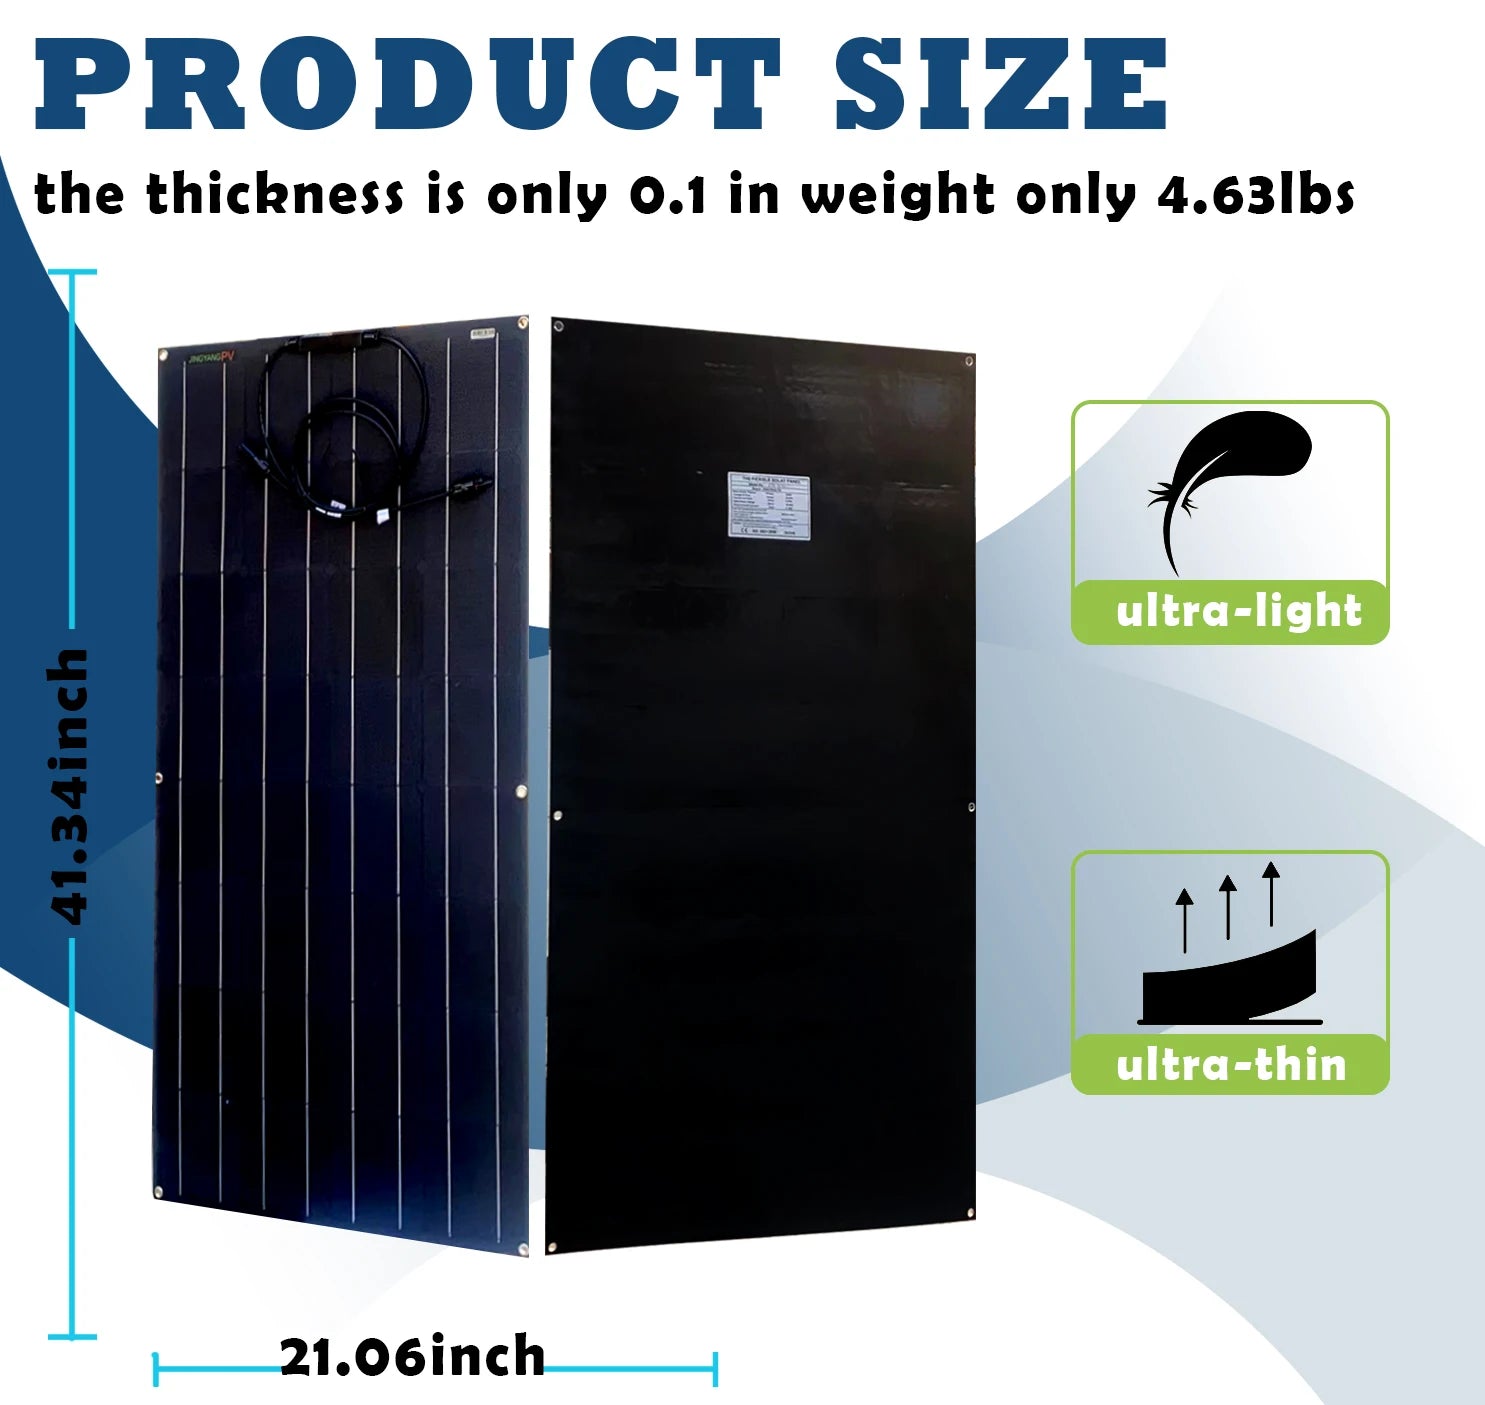 JINGYANG long lasting Semi Flexible solar panel, Compact Solar Panel: 21.06 inches long, 4.63 lbs, 0.1 inches thick.